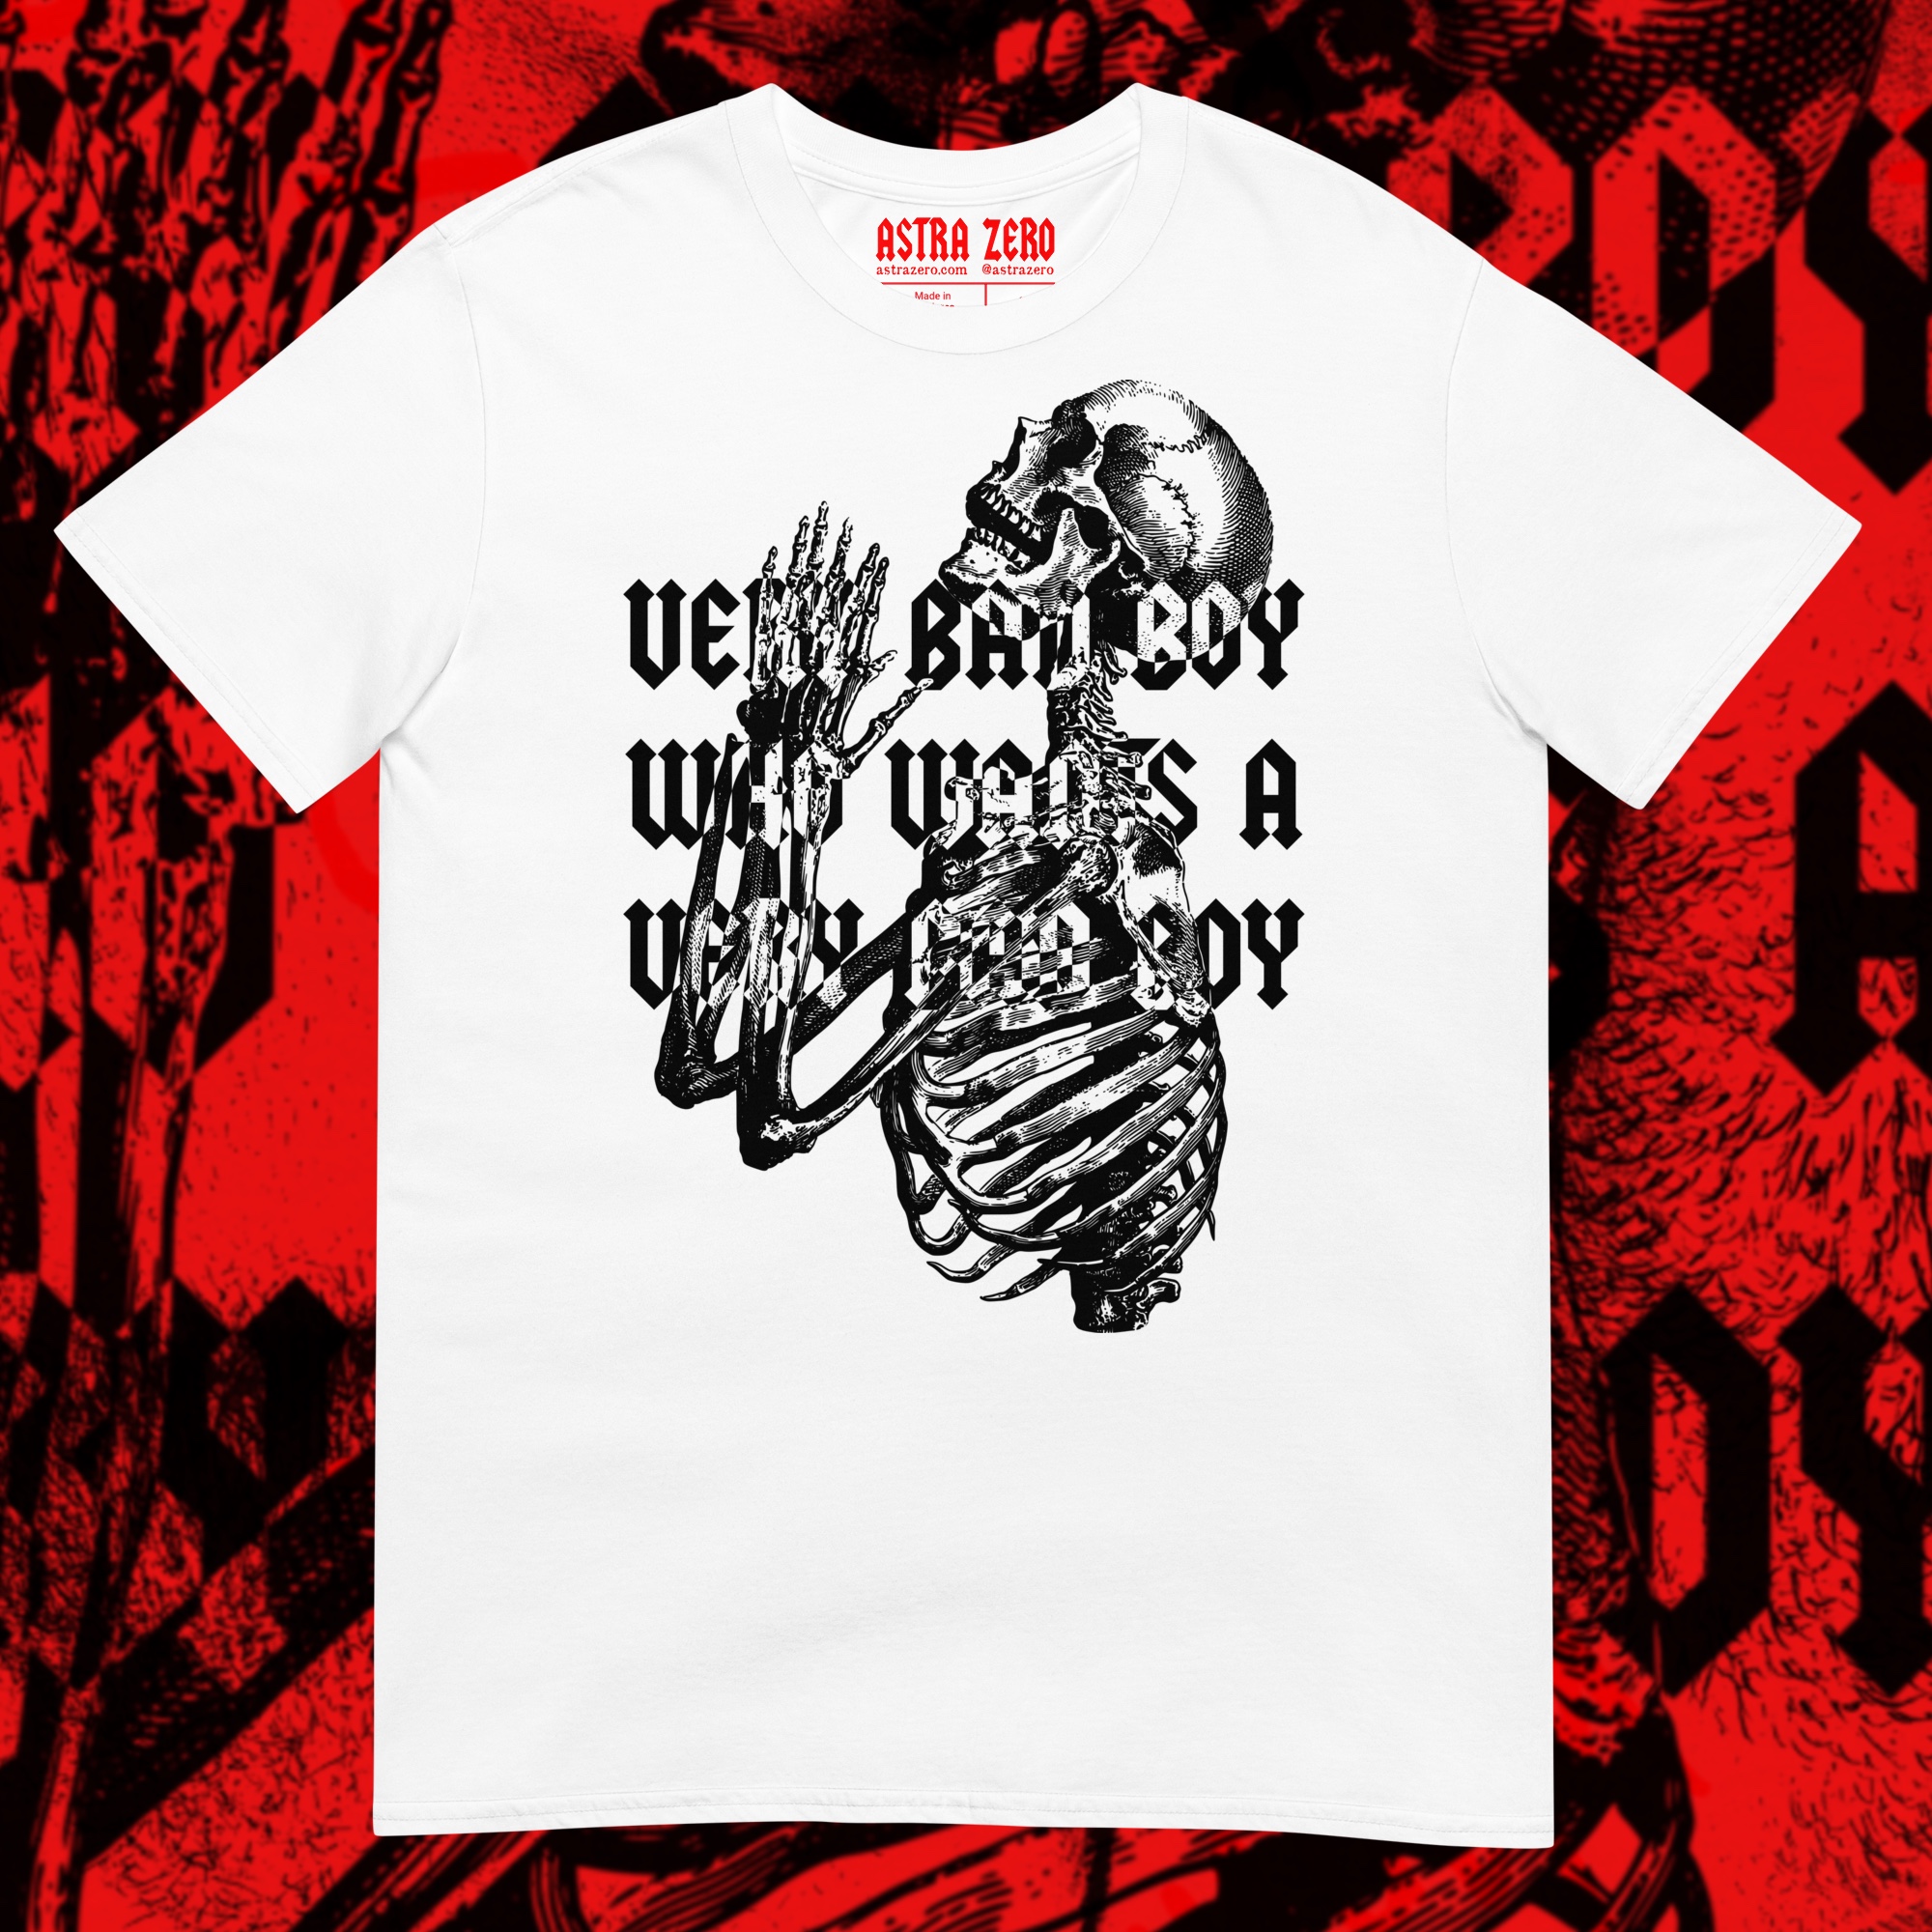 Featured image for “Very Bad Boy who wants a Very Bad Boy - Short-Sleeve Unisex T-Shirt”